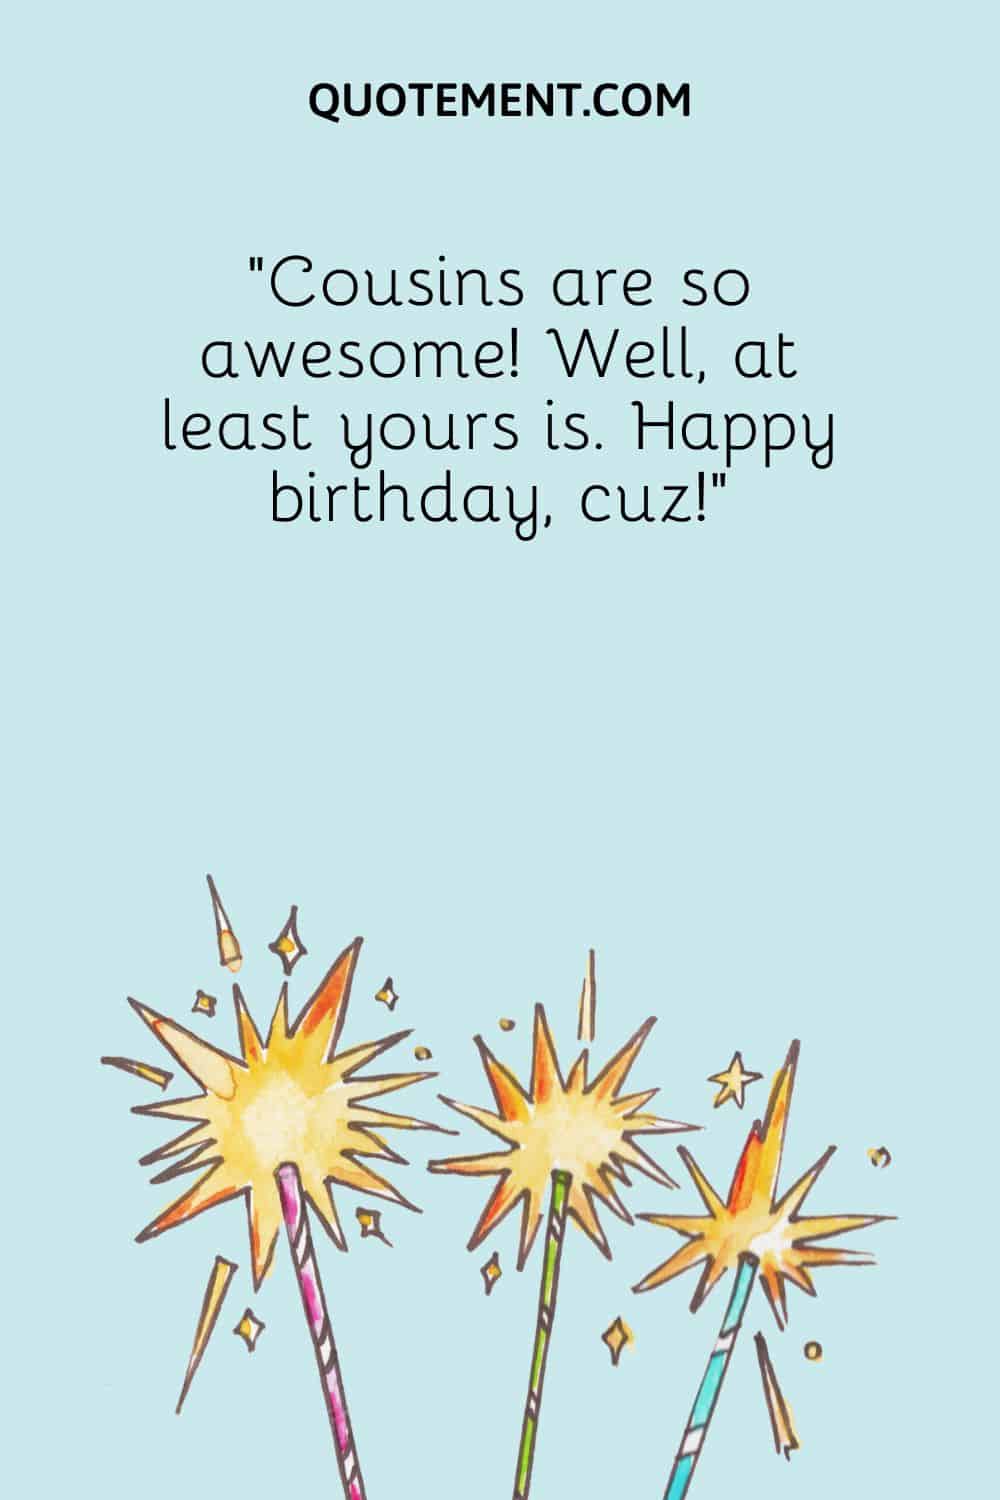 Cousins are so awesome! Well, at least yours is.